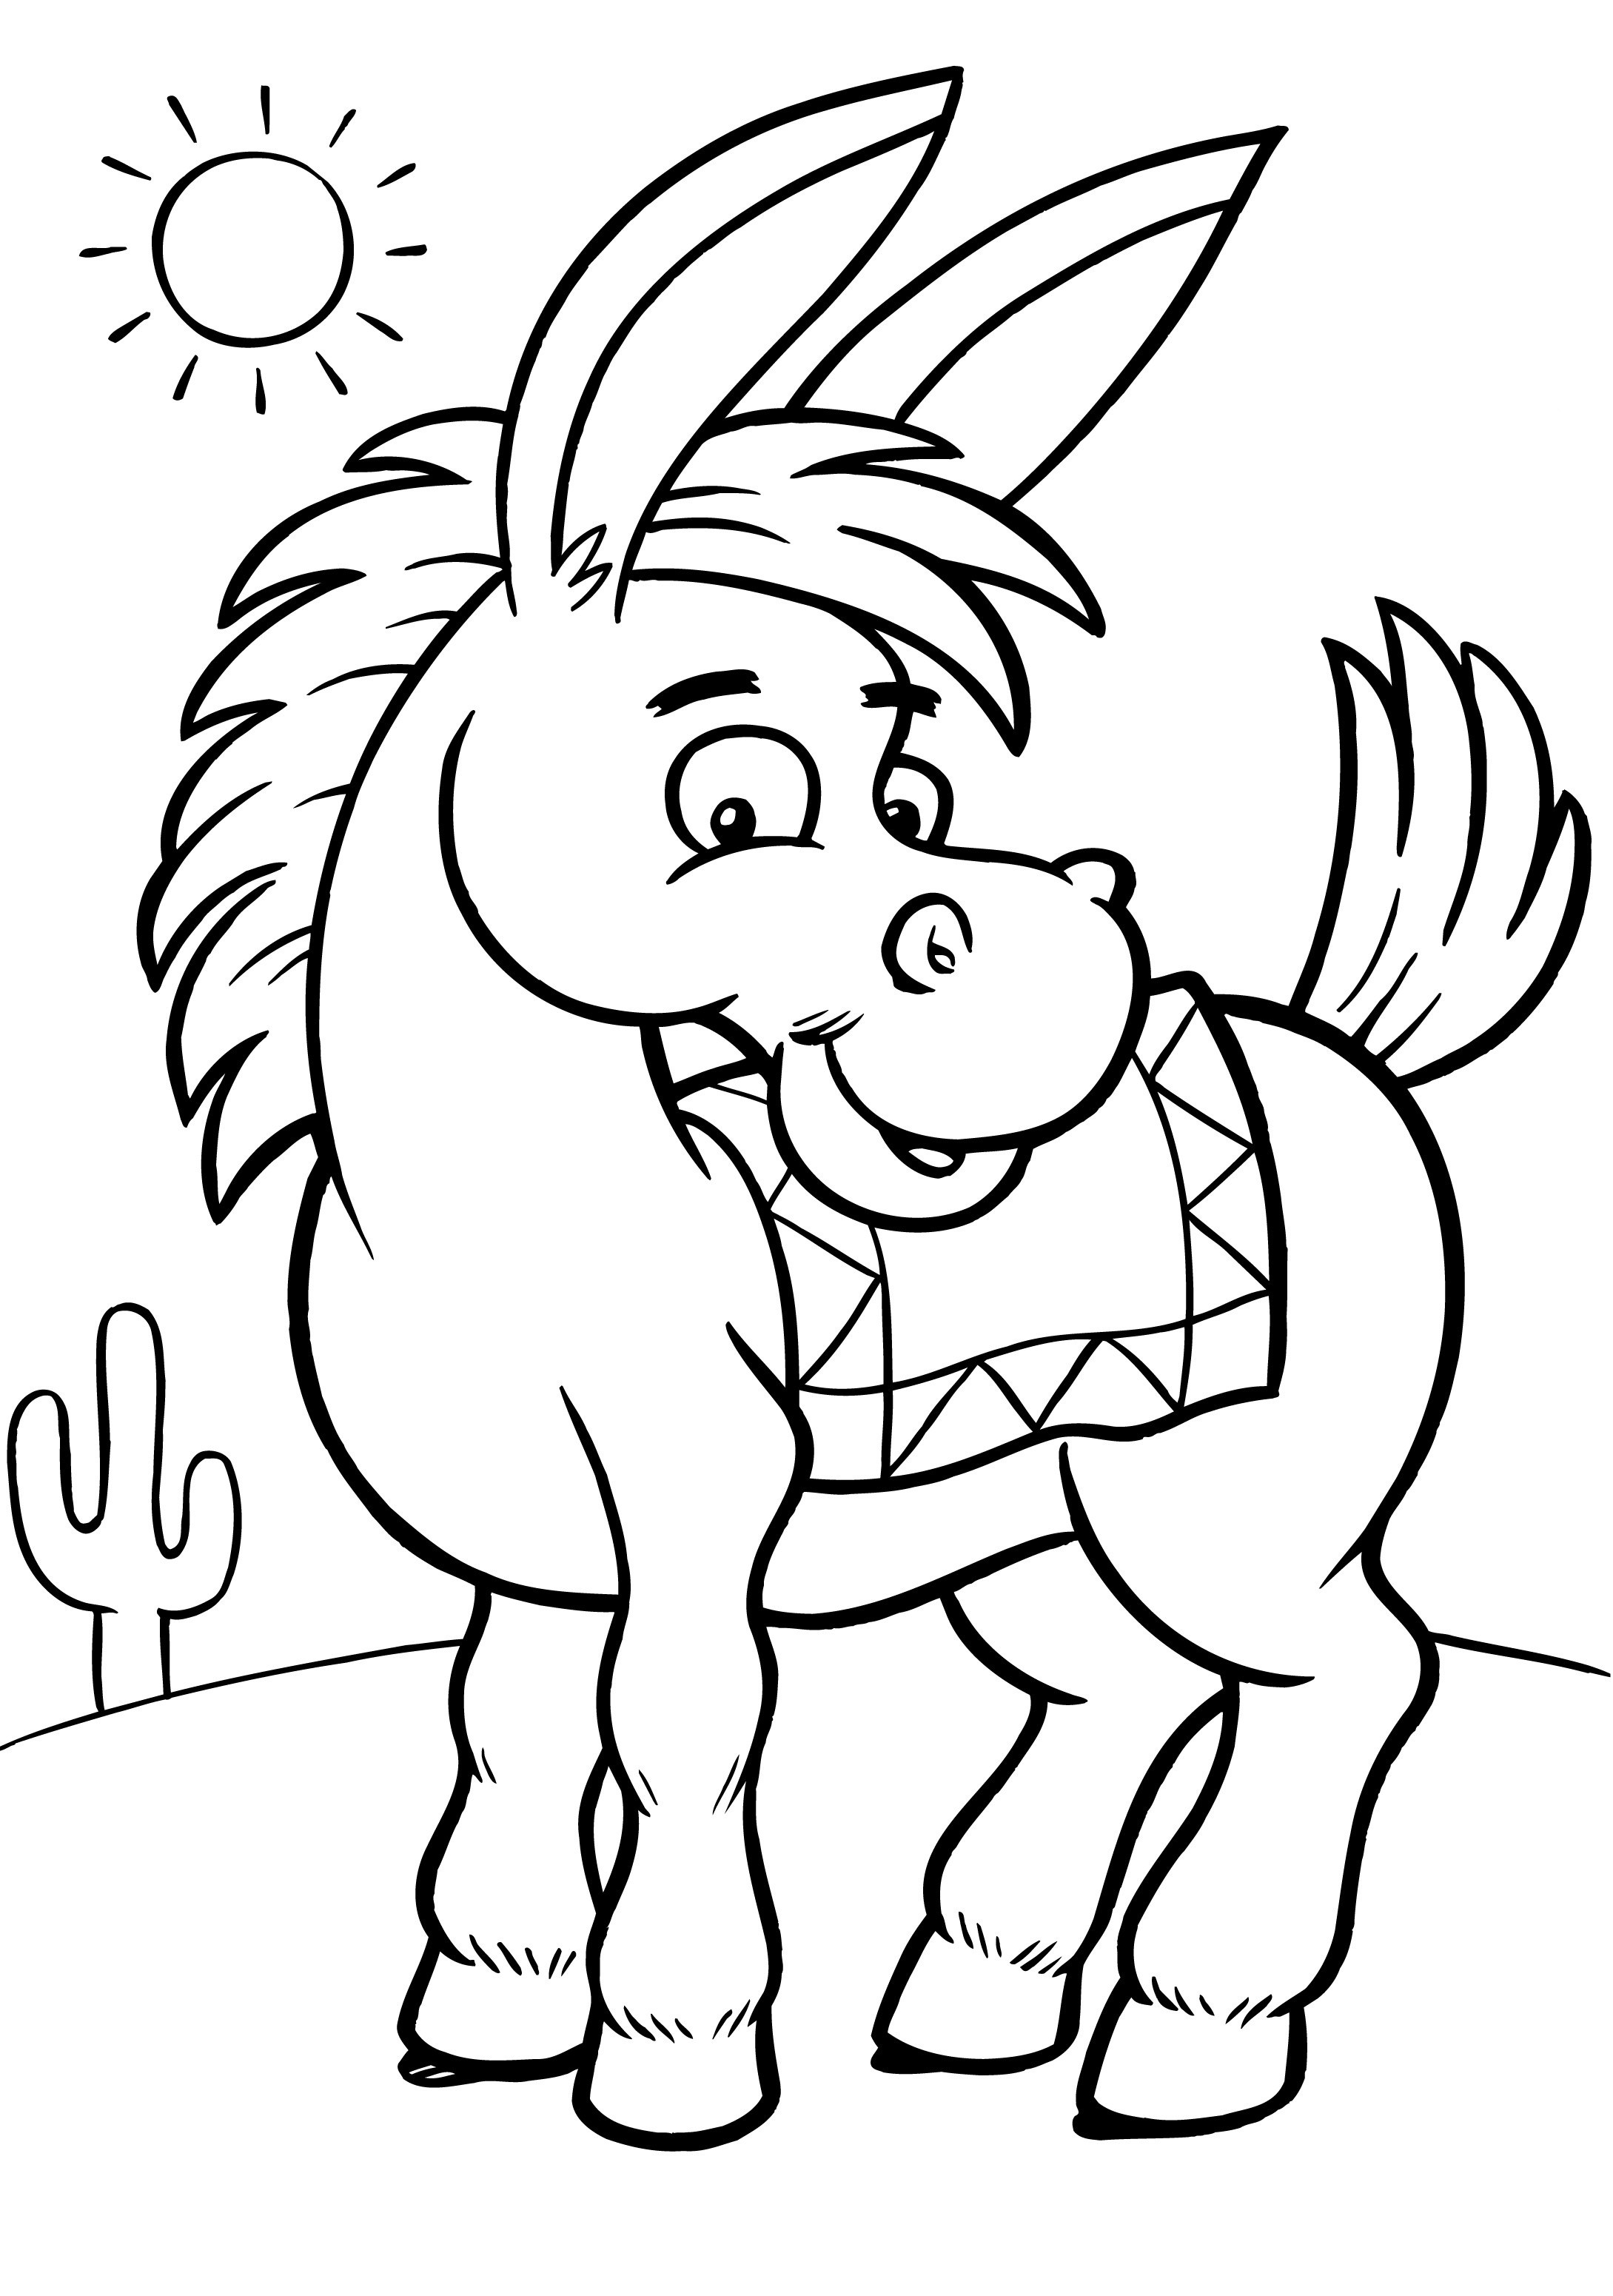 Printable Coloring Pages For Teenagers
 Free Printable Donkey Coloring Pages For Kids